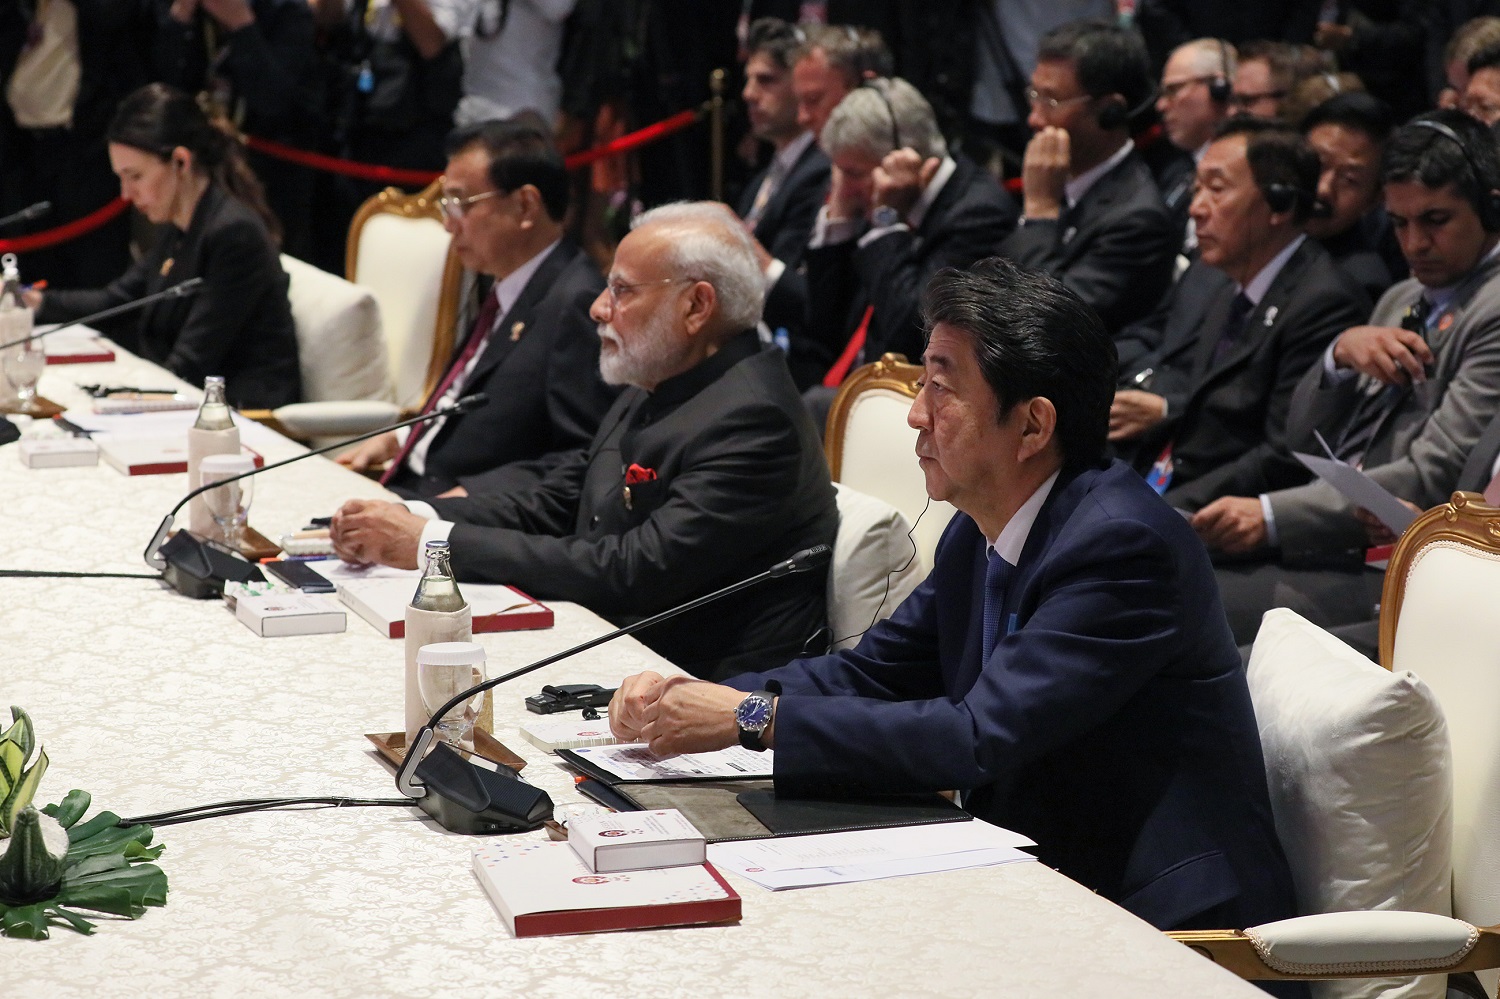 Photograph of the RCEP Summit